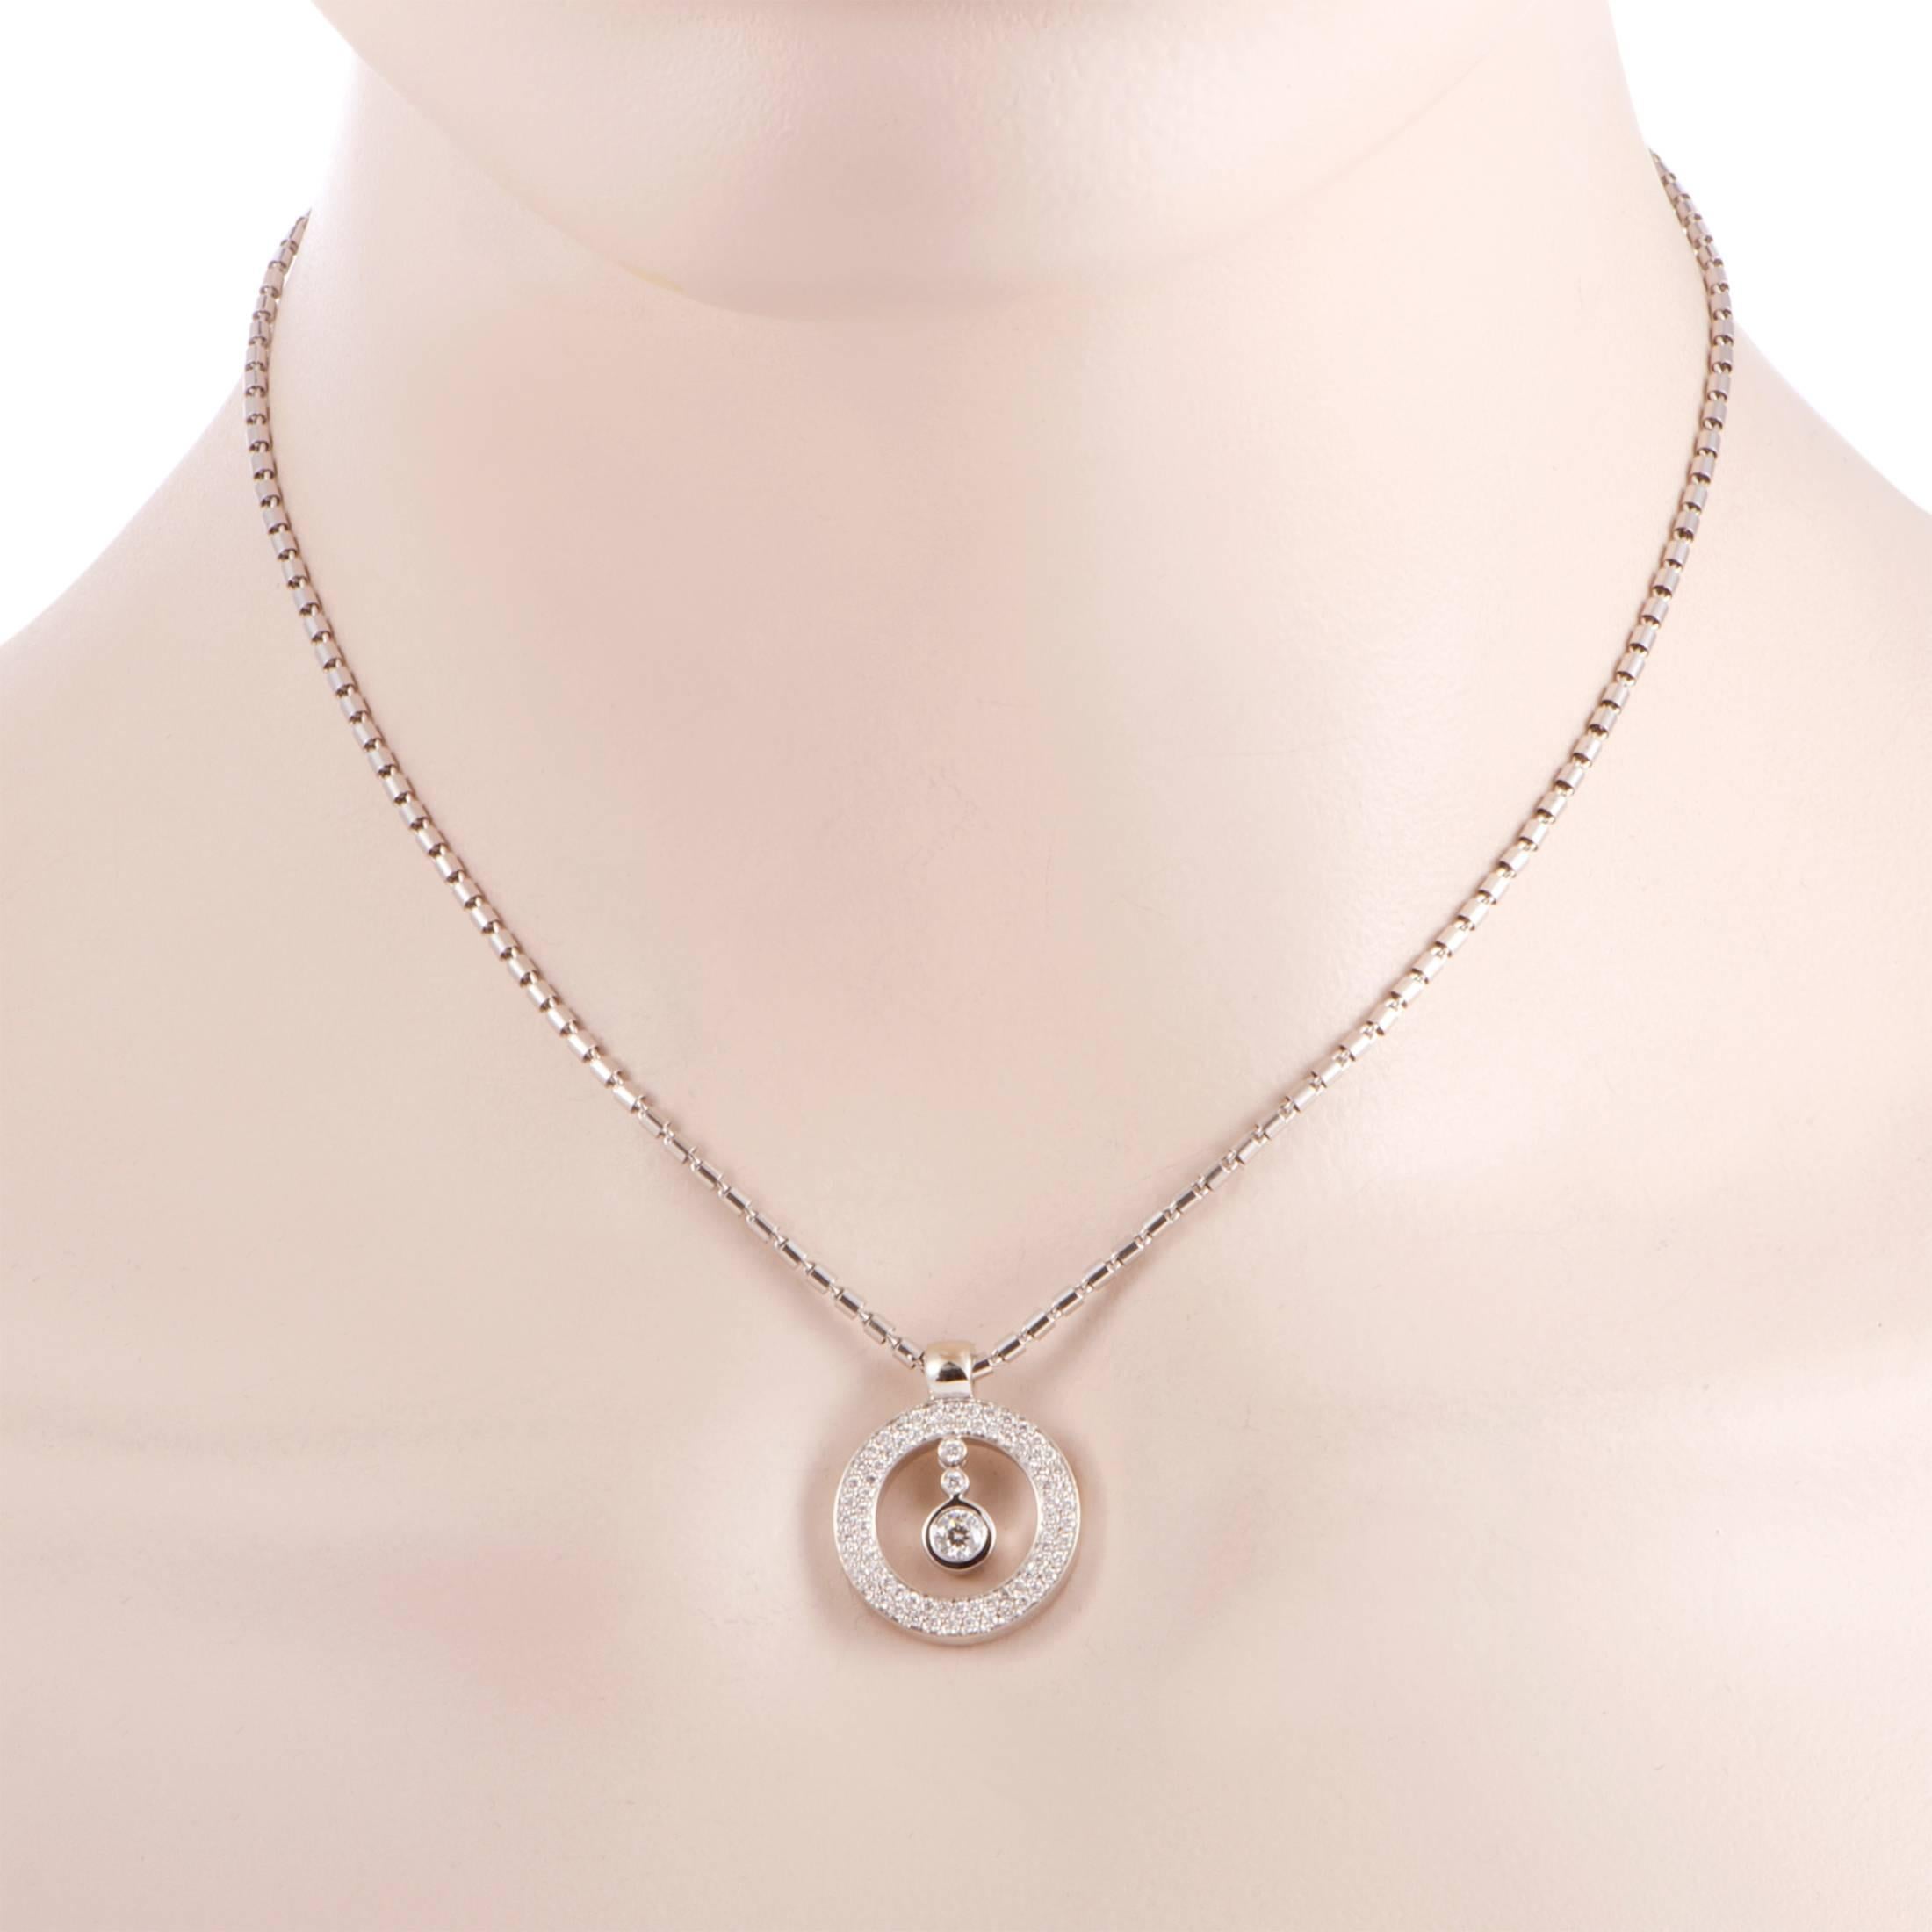 Designed for the refined “Cento” collection by Roberto Coin that is inspired by the intriguing allure of diamond stones, this elegant necklace is made of 18K white gold and boasts an exquisite pendant embellished with 0.85ct of spectacular,